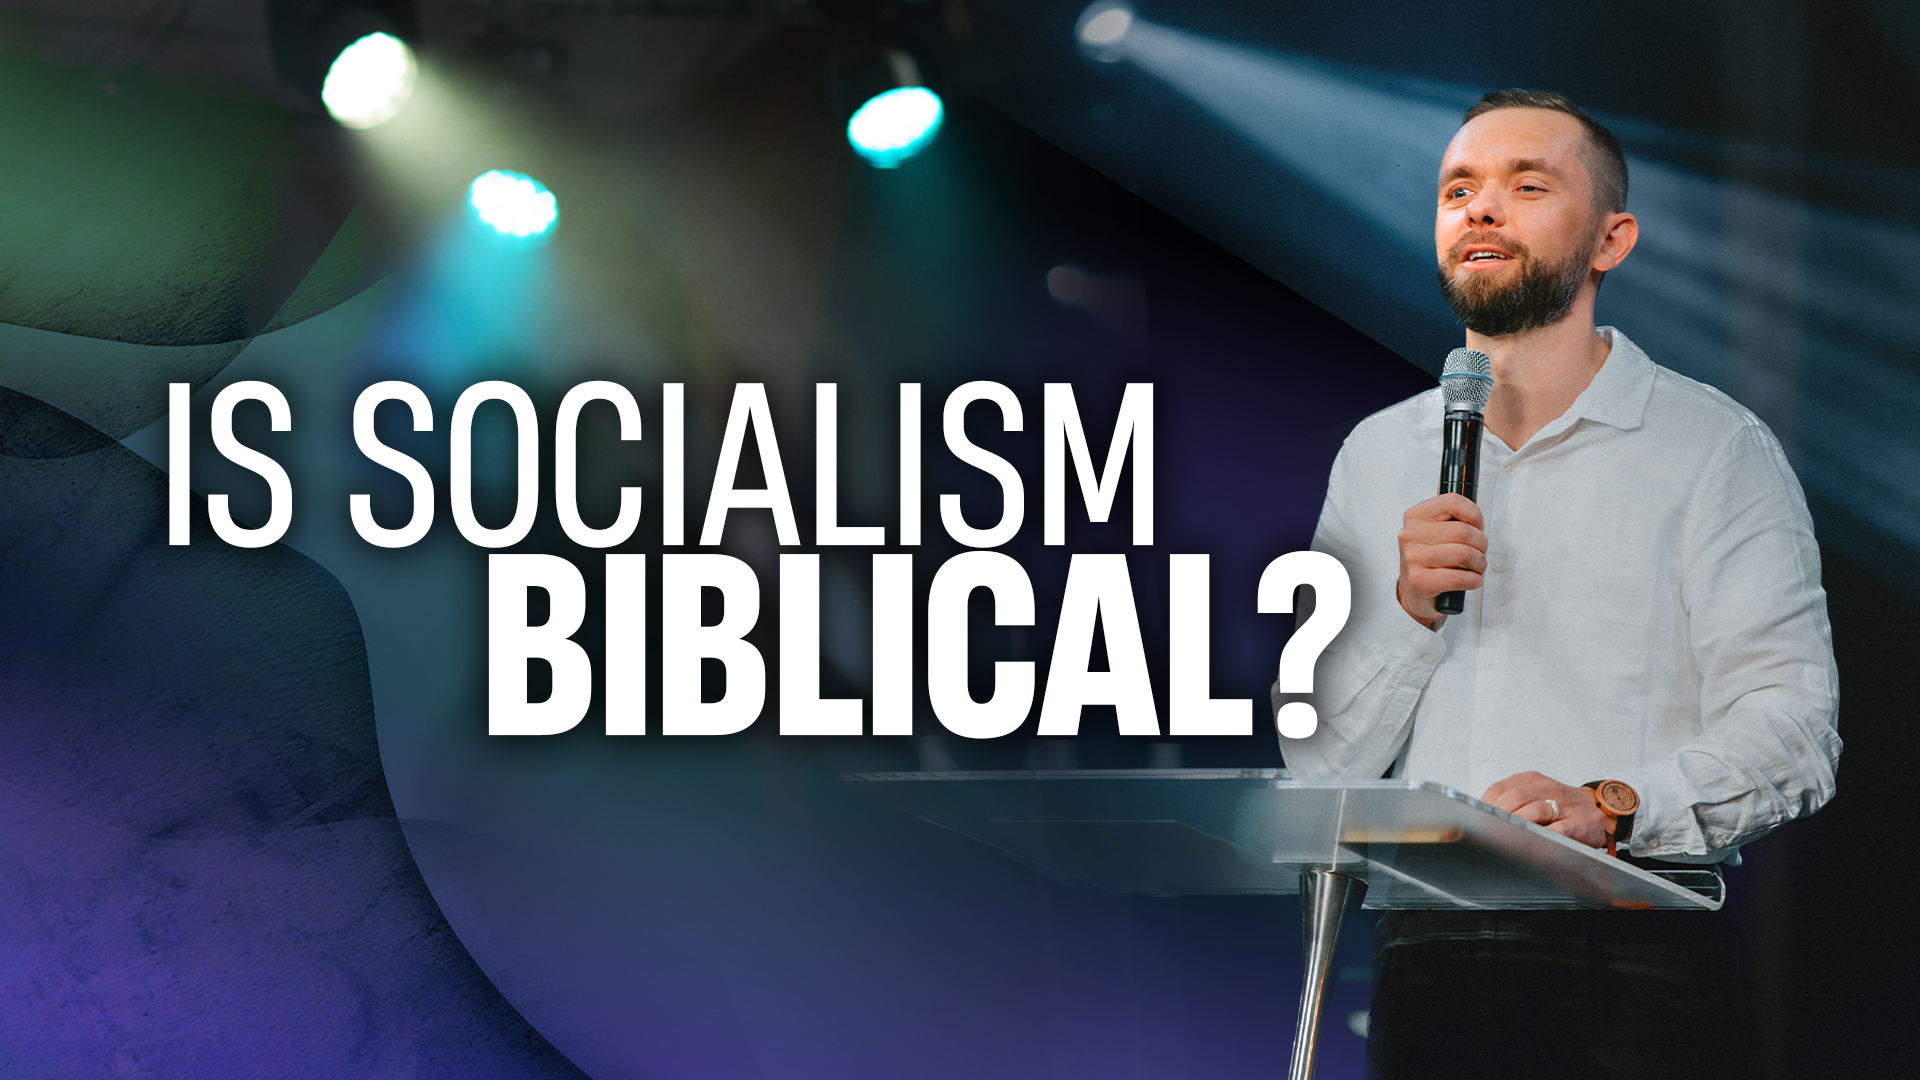 Featured Image for “Is Socialism Biblical?”